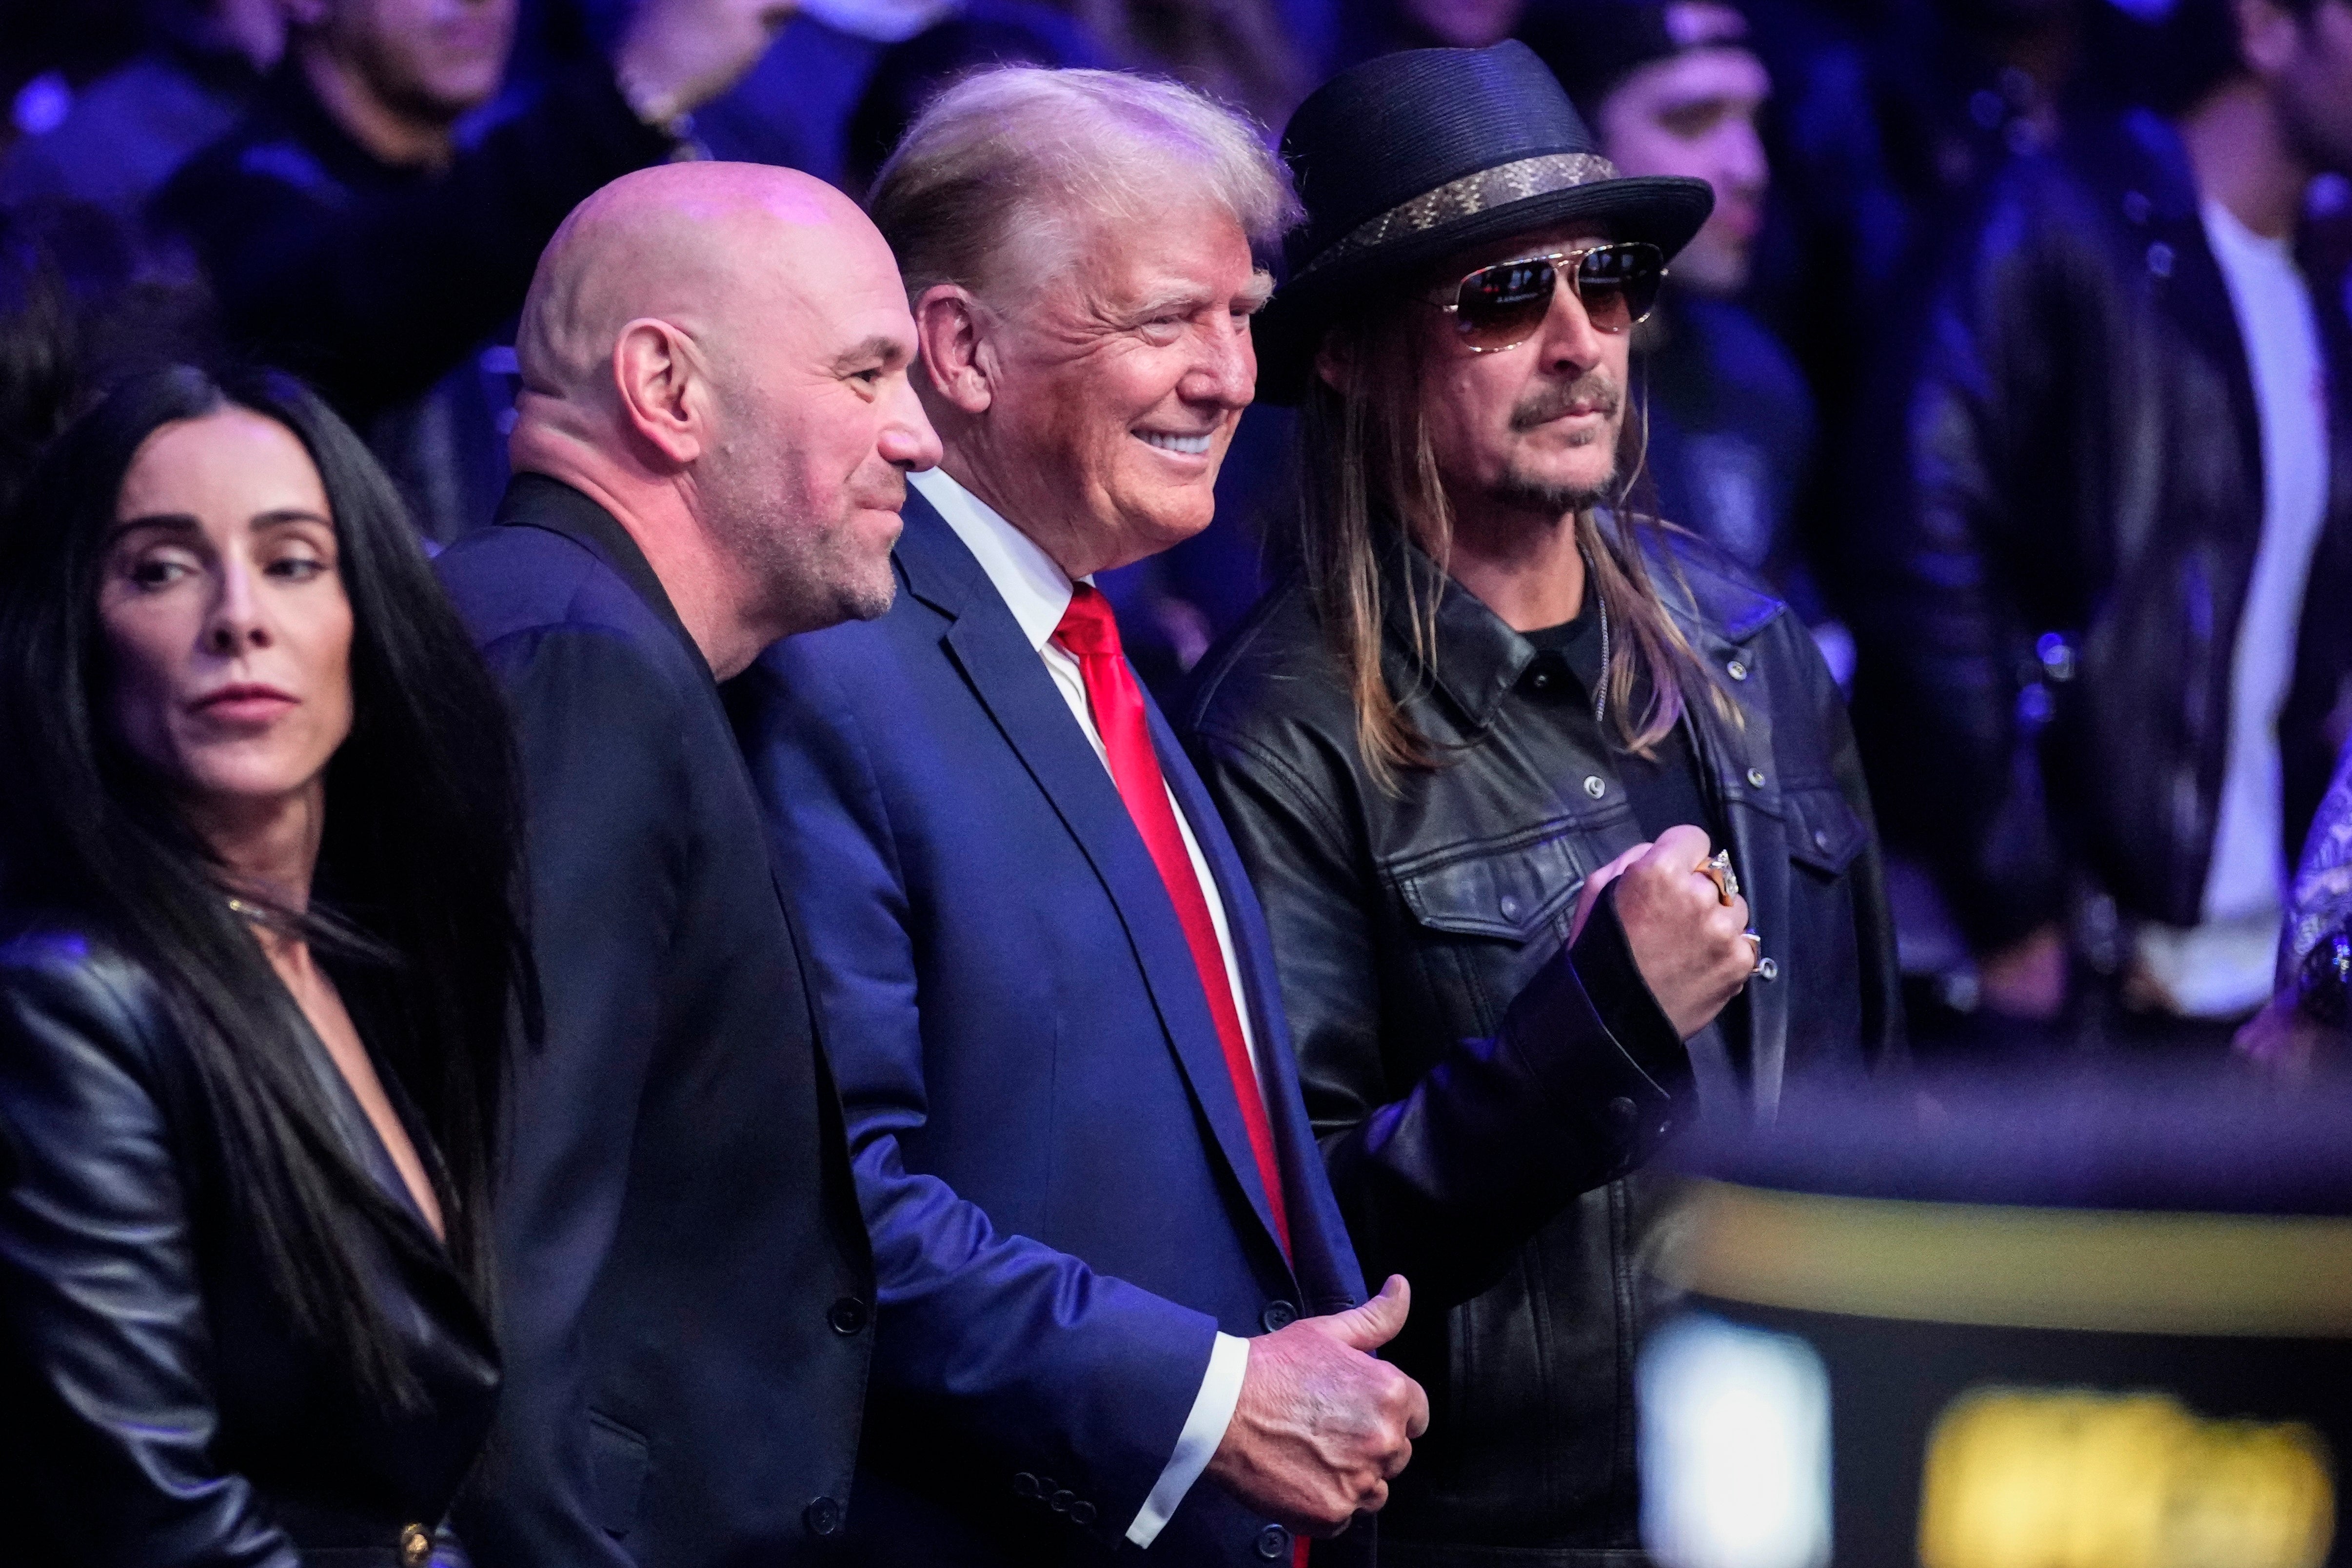 Donald Trump poses for pictures with Dana White (L) and Kid Rock (R)